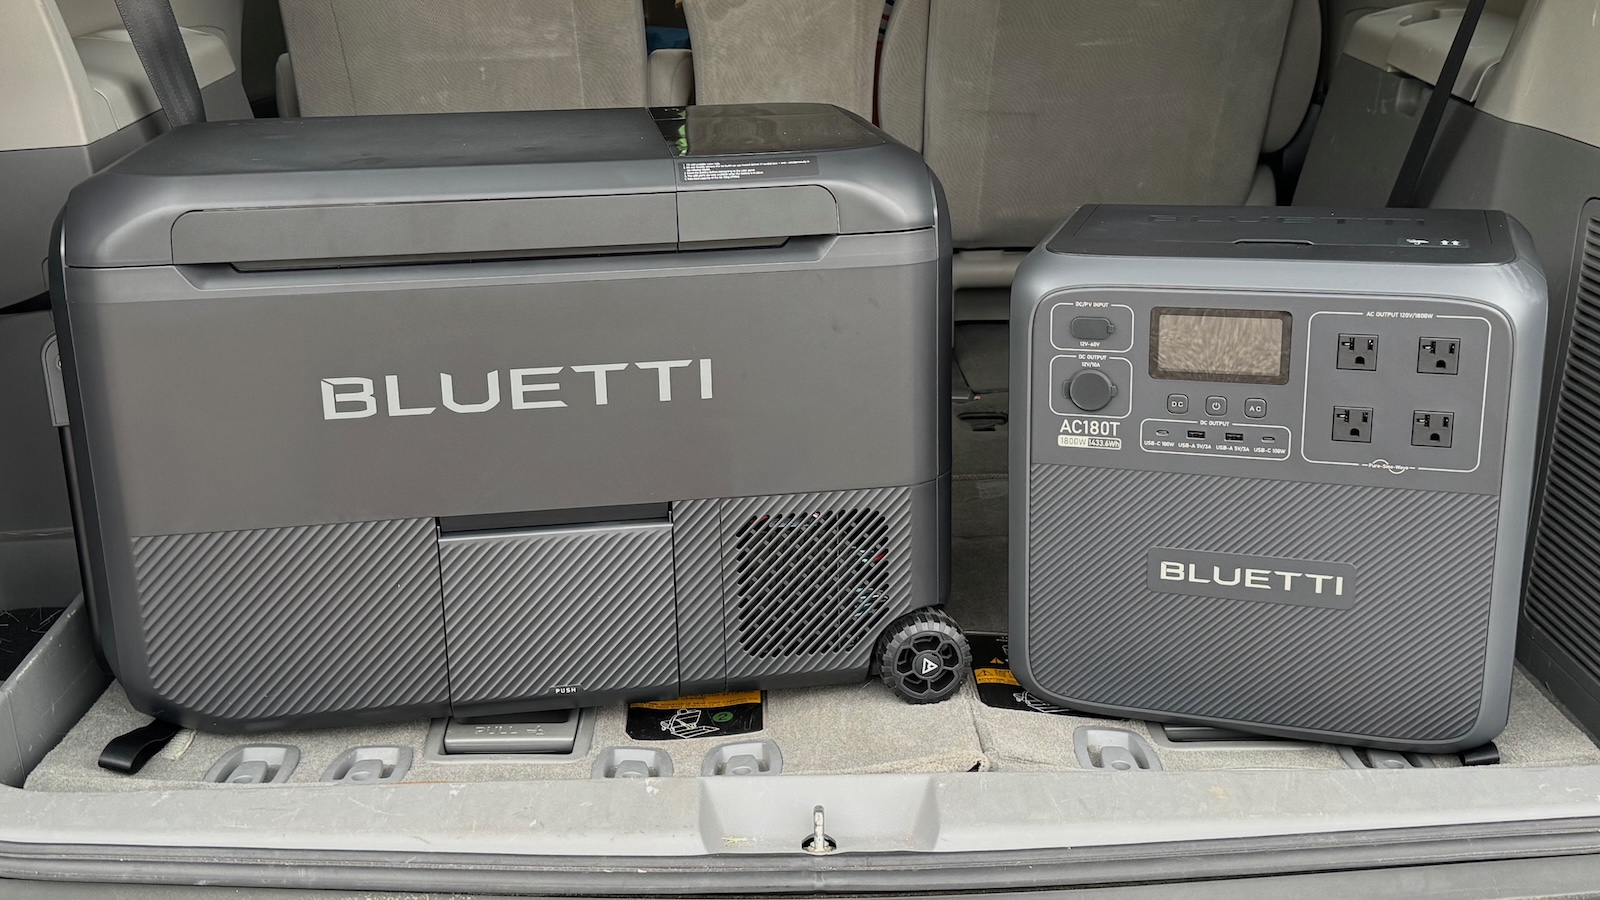 Review: BLUETTI’s New SwapSolar Ecosystem Includes App-Enabled Portable Fridge and Power Station